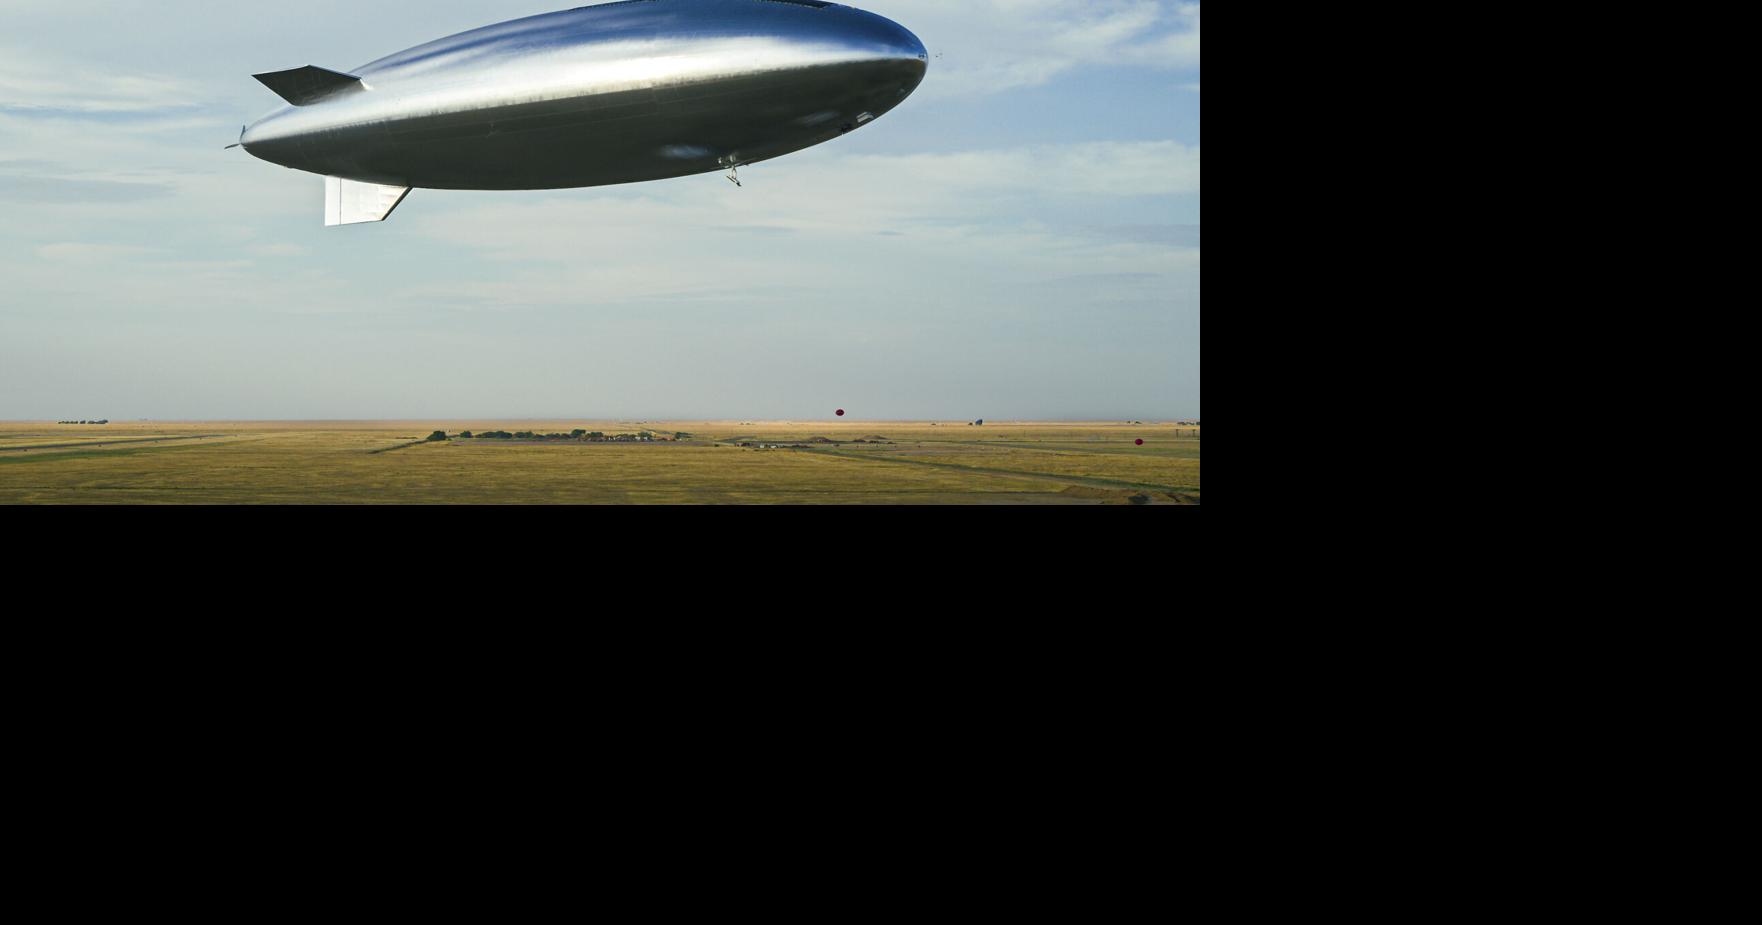 OUT WEST ROUNDUP | High-altitude airship flown in test over New Mexico desert